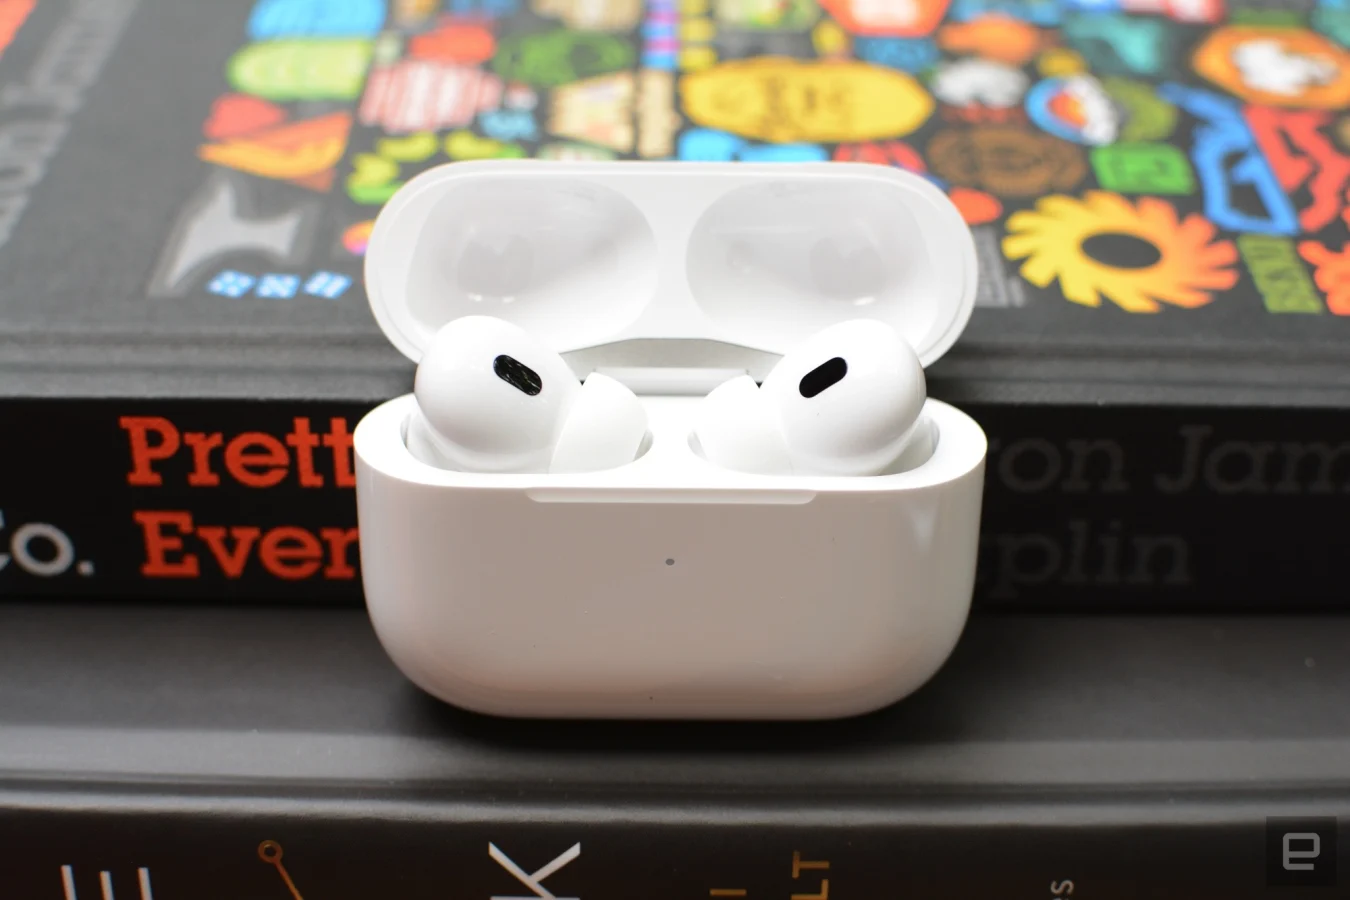 Despite the unchanged design, Apple has packed an assortment of updates into the new AirPods Pro.  All of the conveniences from the 2019 model are here as well, alongside additions like Adaptive Transparency, Personalized Spatial Audio and a new touch gesture in tow.  There's room to further refine the familiar formula, but Apple has given iPhone owners several reasons to upgrade.